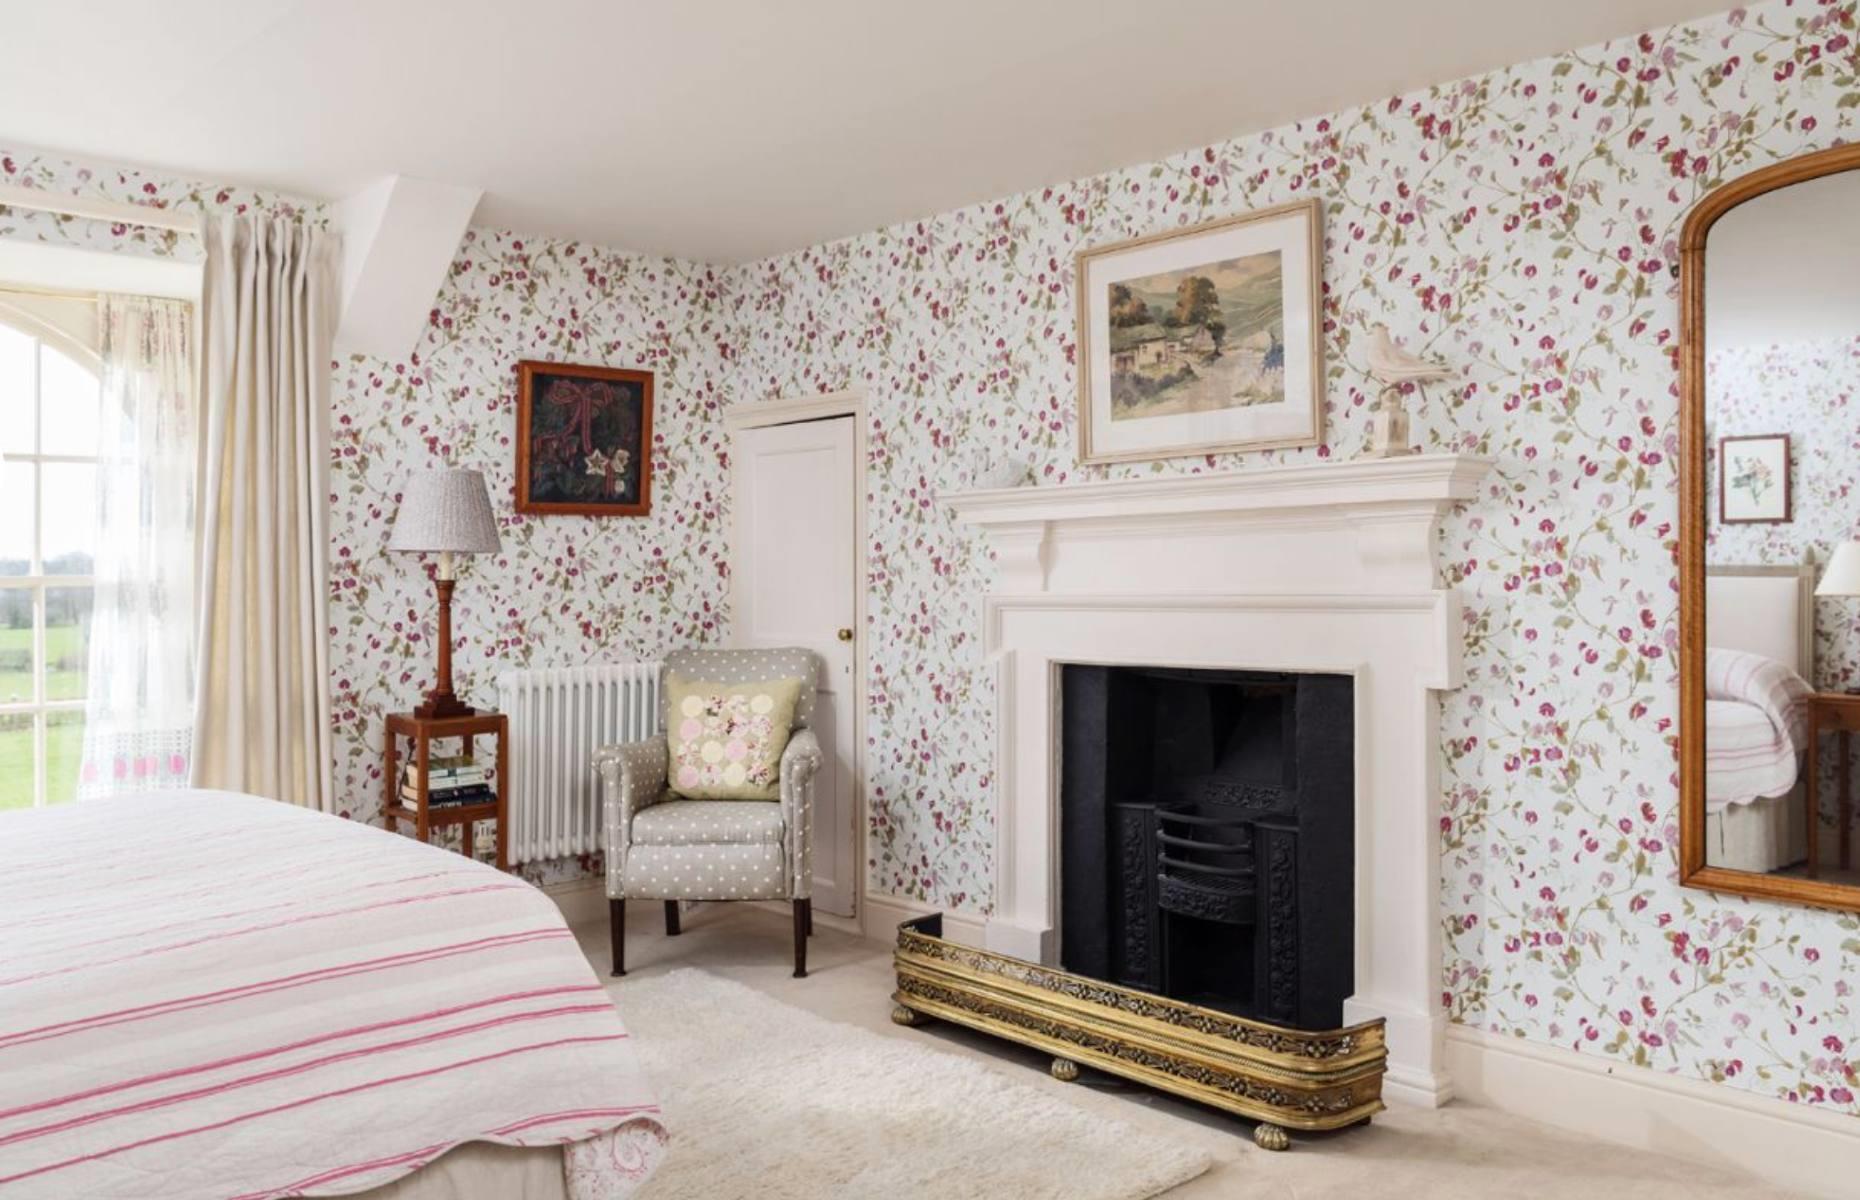 <p>Although you should sleep well in this pretty bedroom, with its Cole & Son’s ‘Sweet Pea’ wallpaper and vintage bedcover, keep an ear out for the ghosts of 1,000 English Civil War soldiers who, according to <a href="https://www.mirror.co.uk/news/world-news/kate-middleton-visits-truro-cathedral-8747214">reports</a>, are said to haunt the grounds of the ancient site.</p>  <p>It was here in 1644 that Charles l’s Royalist forces drove out Cromwell’s occupying troops after a month-long siege resulting in 1,000 fallen soldiers which, according to legend, were destined to gallop through the woods forever more.</p>